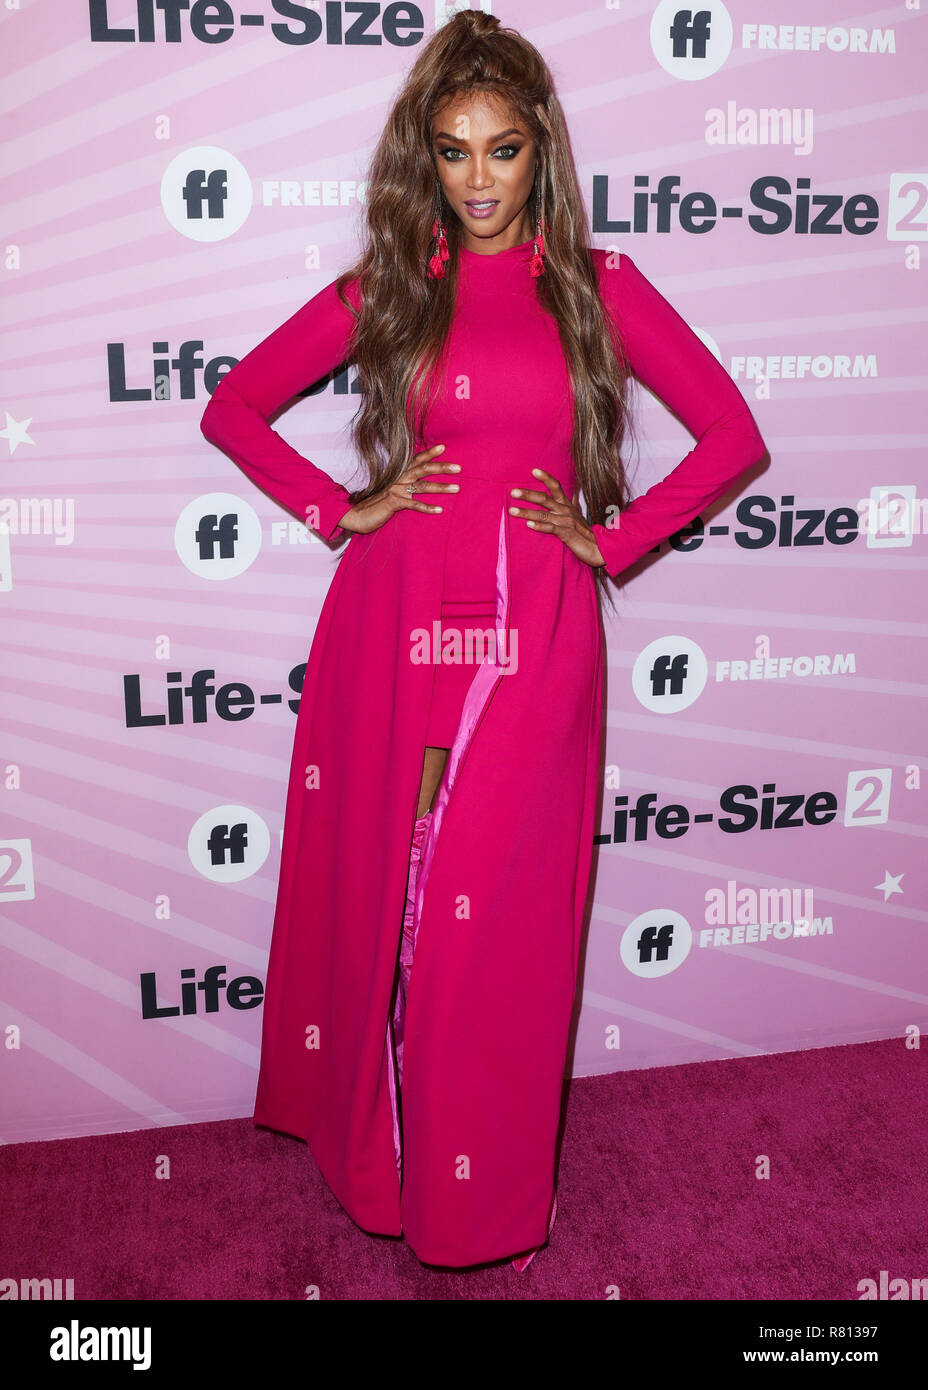 HOLLYWOOD, LOS ANGELES, CA, USA - NOVEMBER 27: Model Tyra Banks arrives at the World Premiere Of Freeform's 'Life-Size 2' held at The Hollywood Roosevelt on November 27, 2018 in Hollywood, Los Angeles, California, United States. (Photo by Xavier Collin/Image Press Agency) Stock Photo